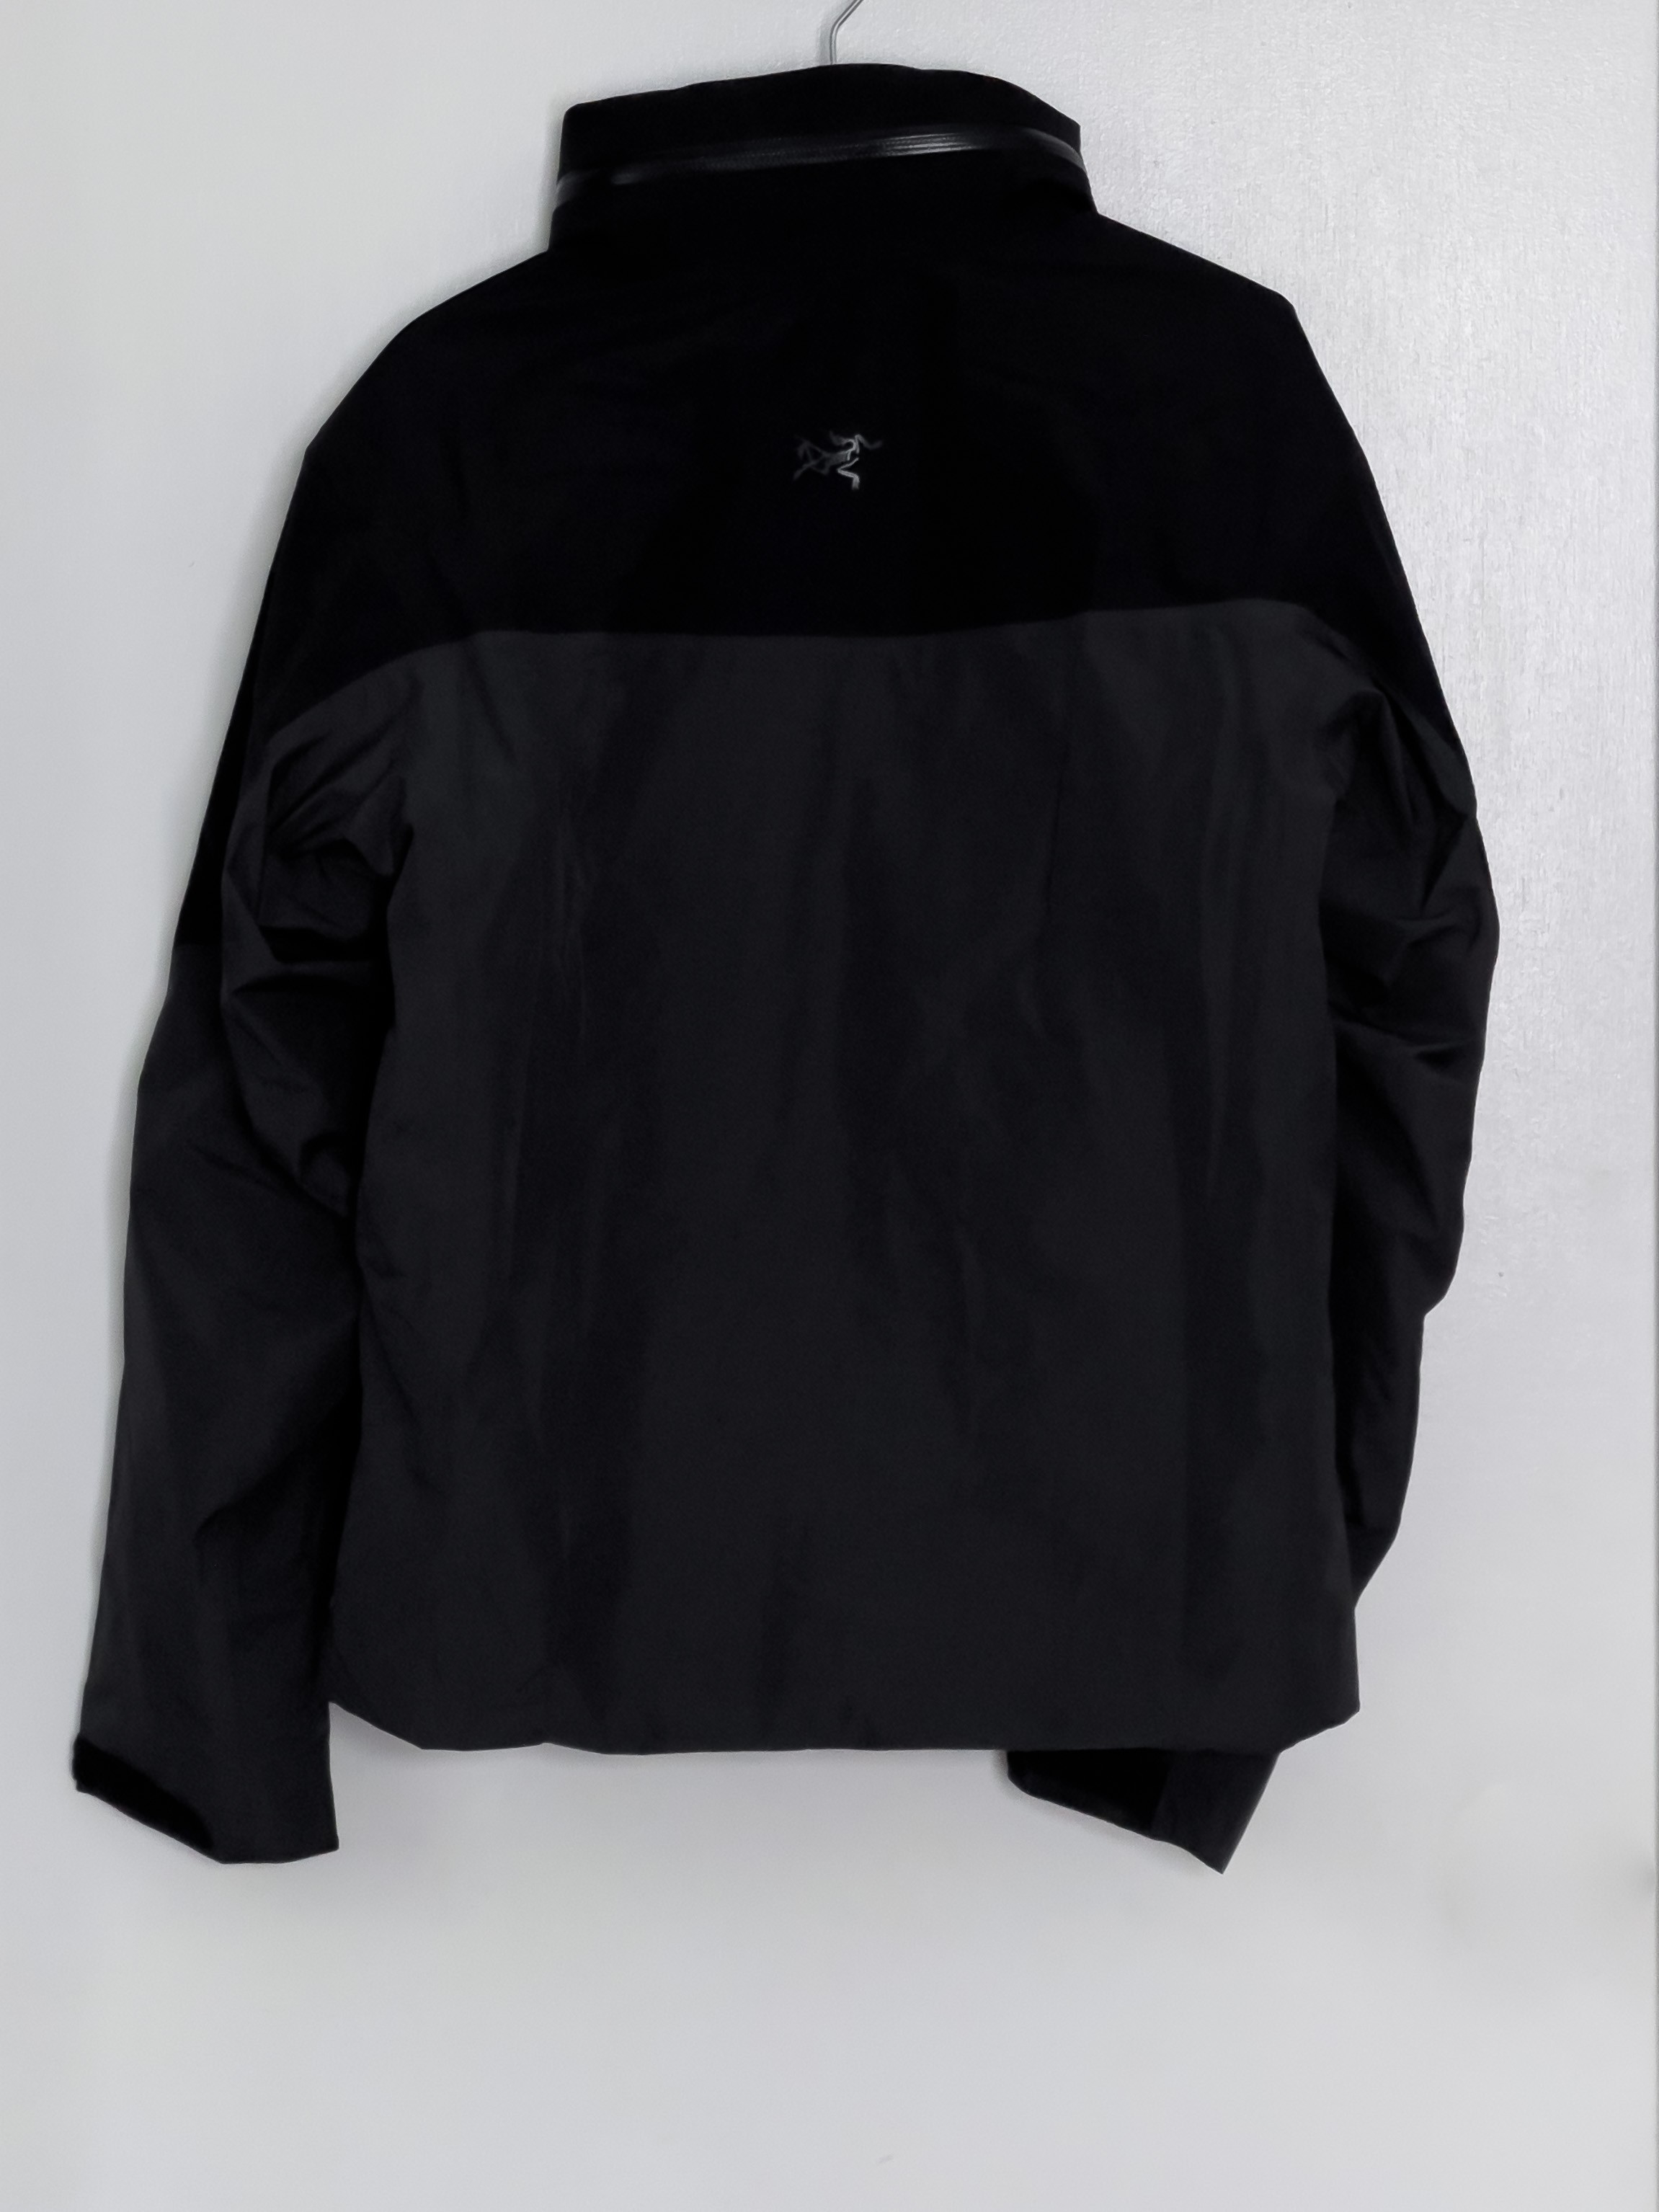 System_A Axis Jacket - 2